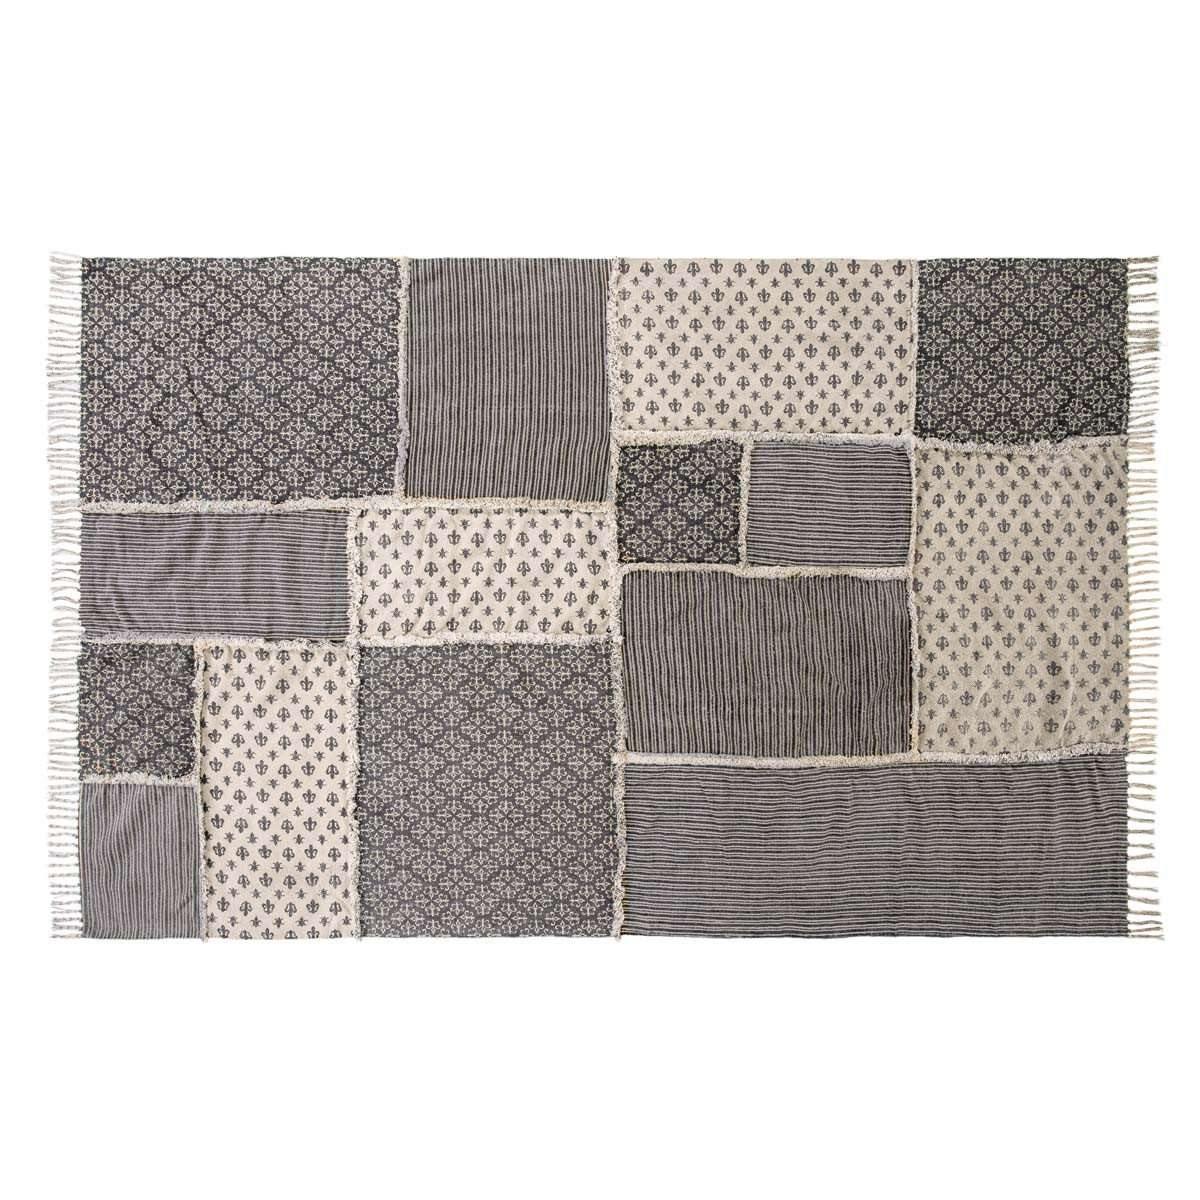 Elysee Patchwork Rug Rect 6'x9' VHC Brands - The Fox Decor